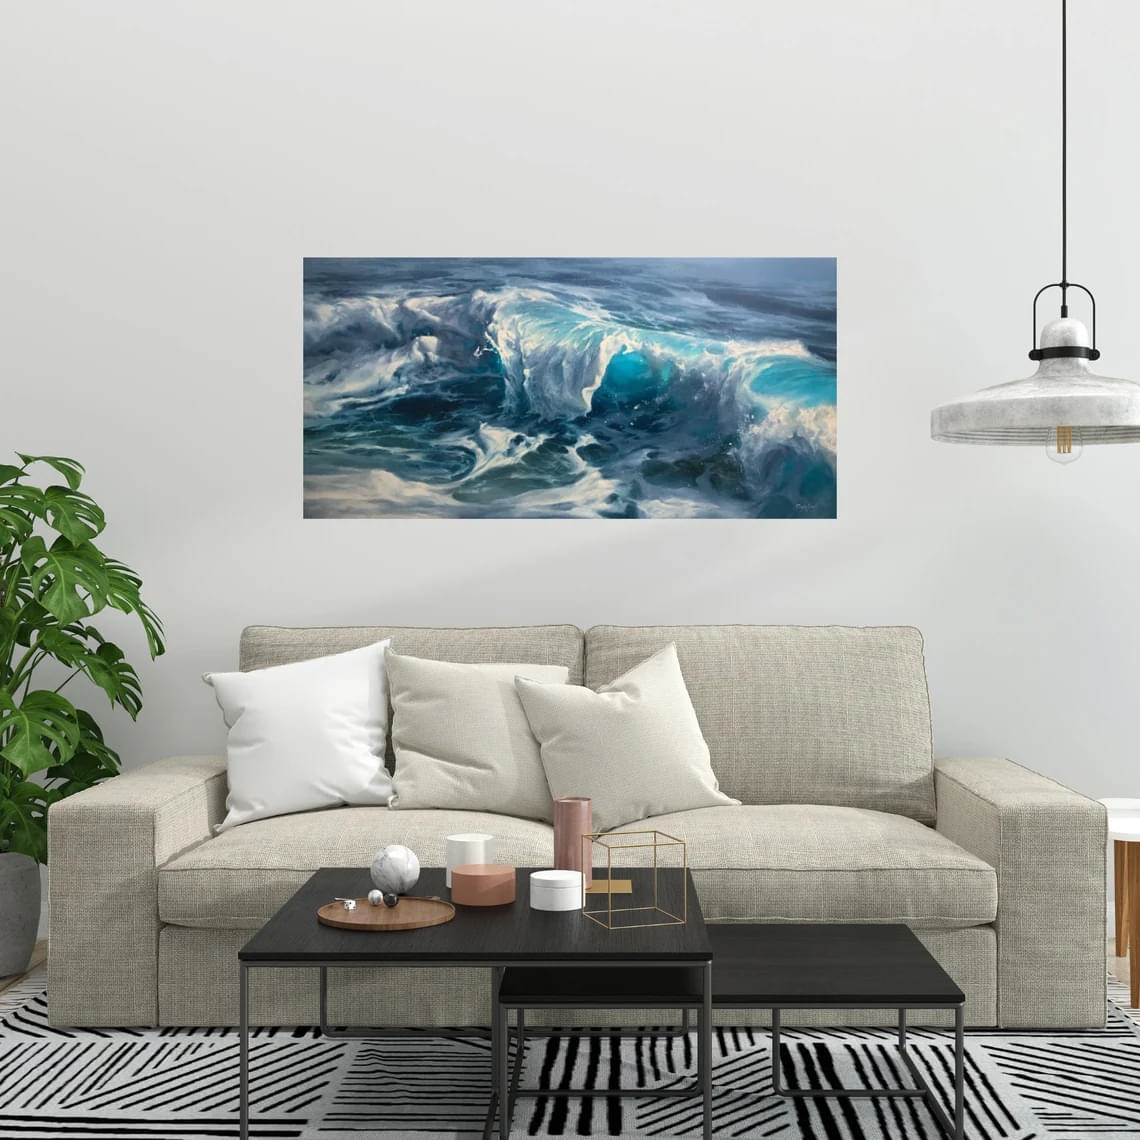 "Glimpses Of Clarity" - Seascape Artwork Sample on Wall